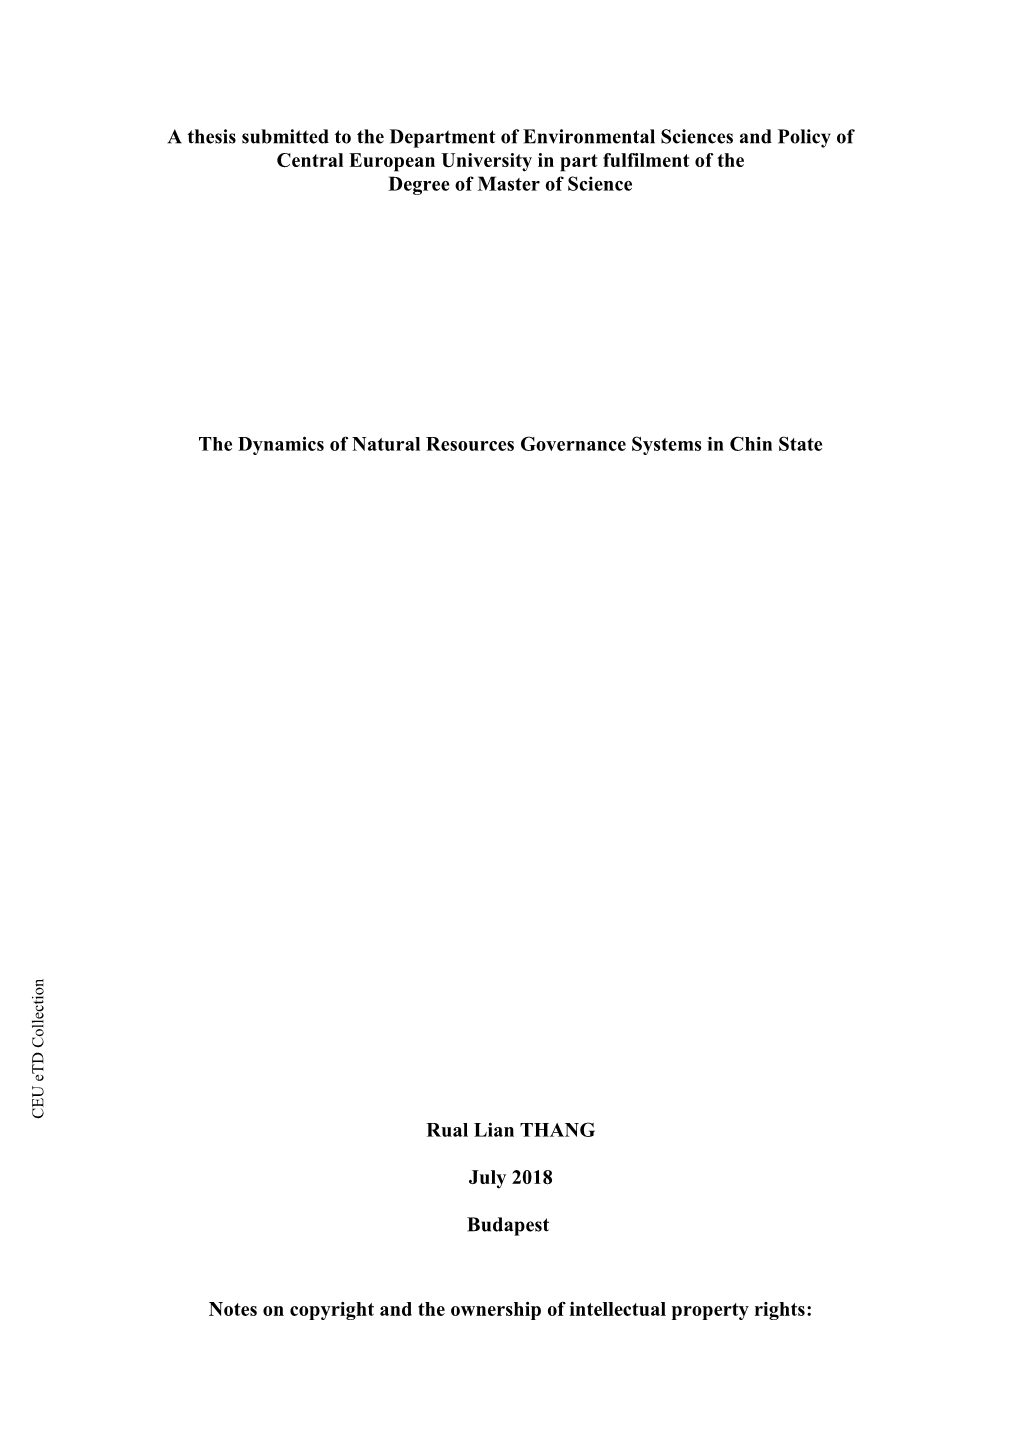 A Thesis Submitted to the Department of Environmental Sciences and Policy of Central European University in Part Fulfilment of the Degree of Master of Science